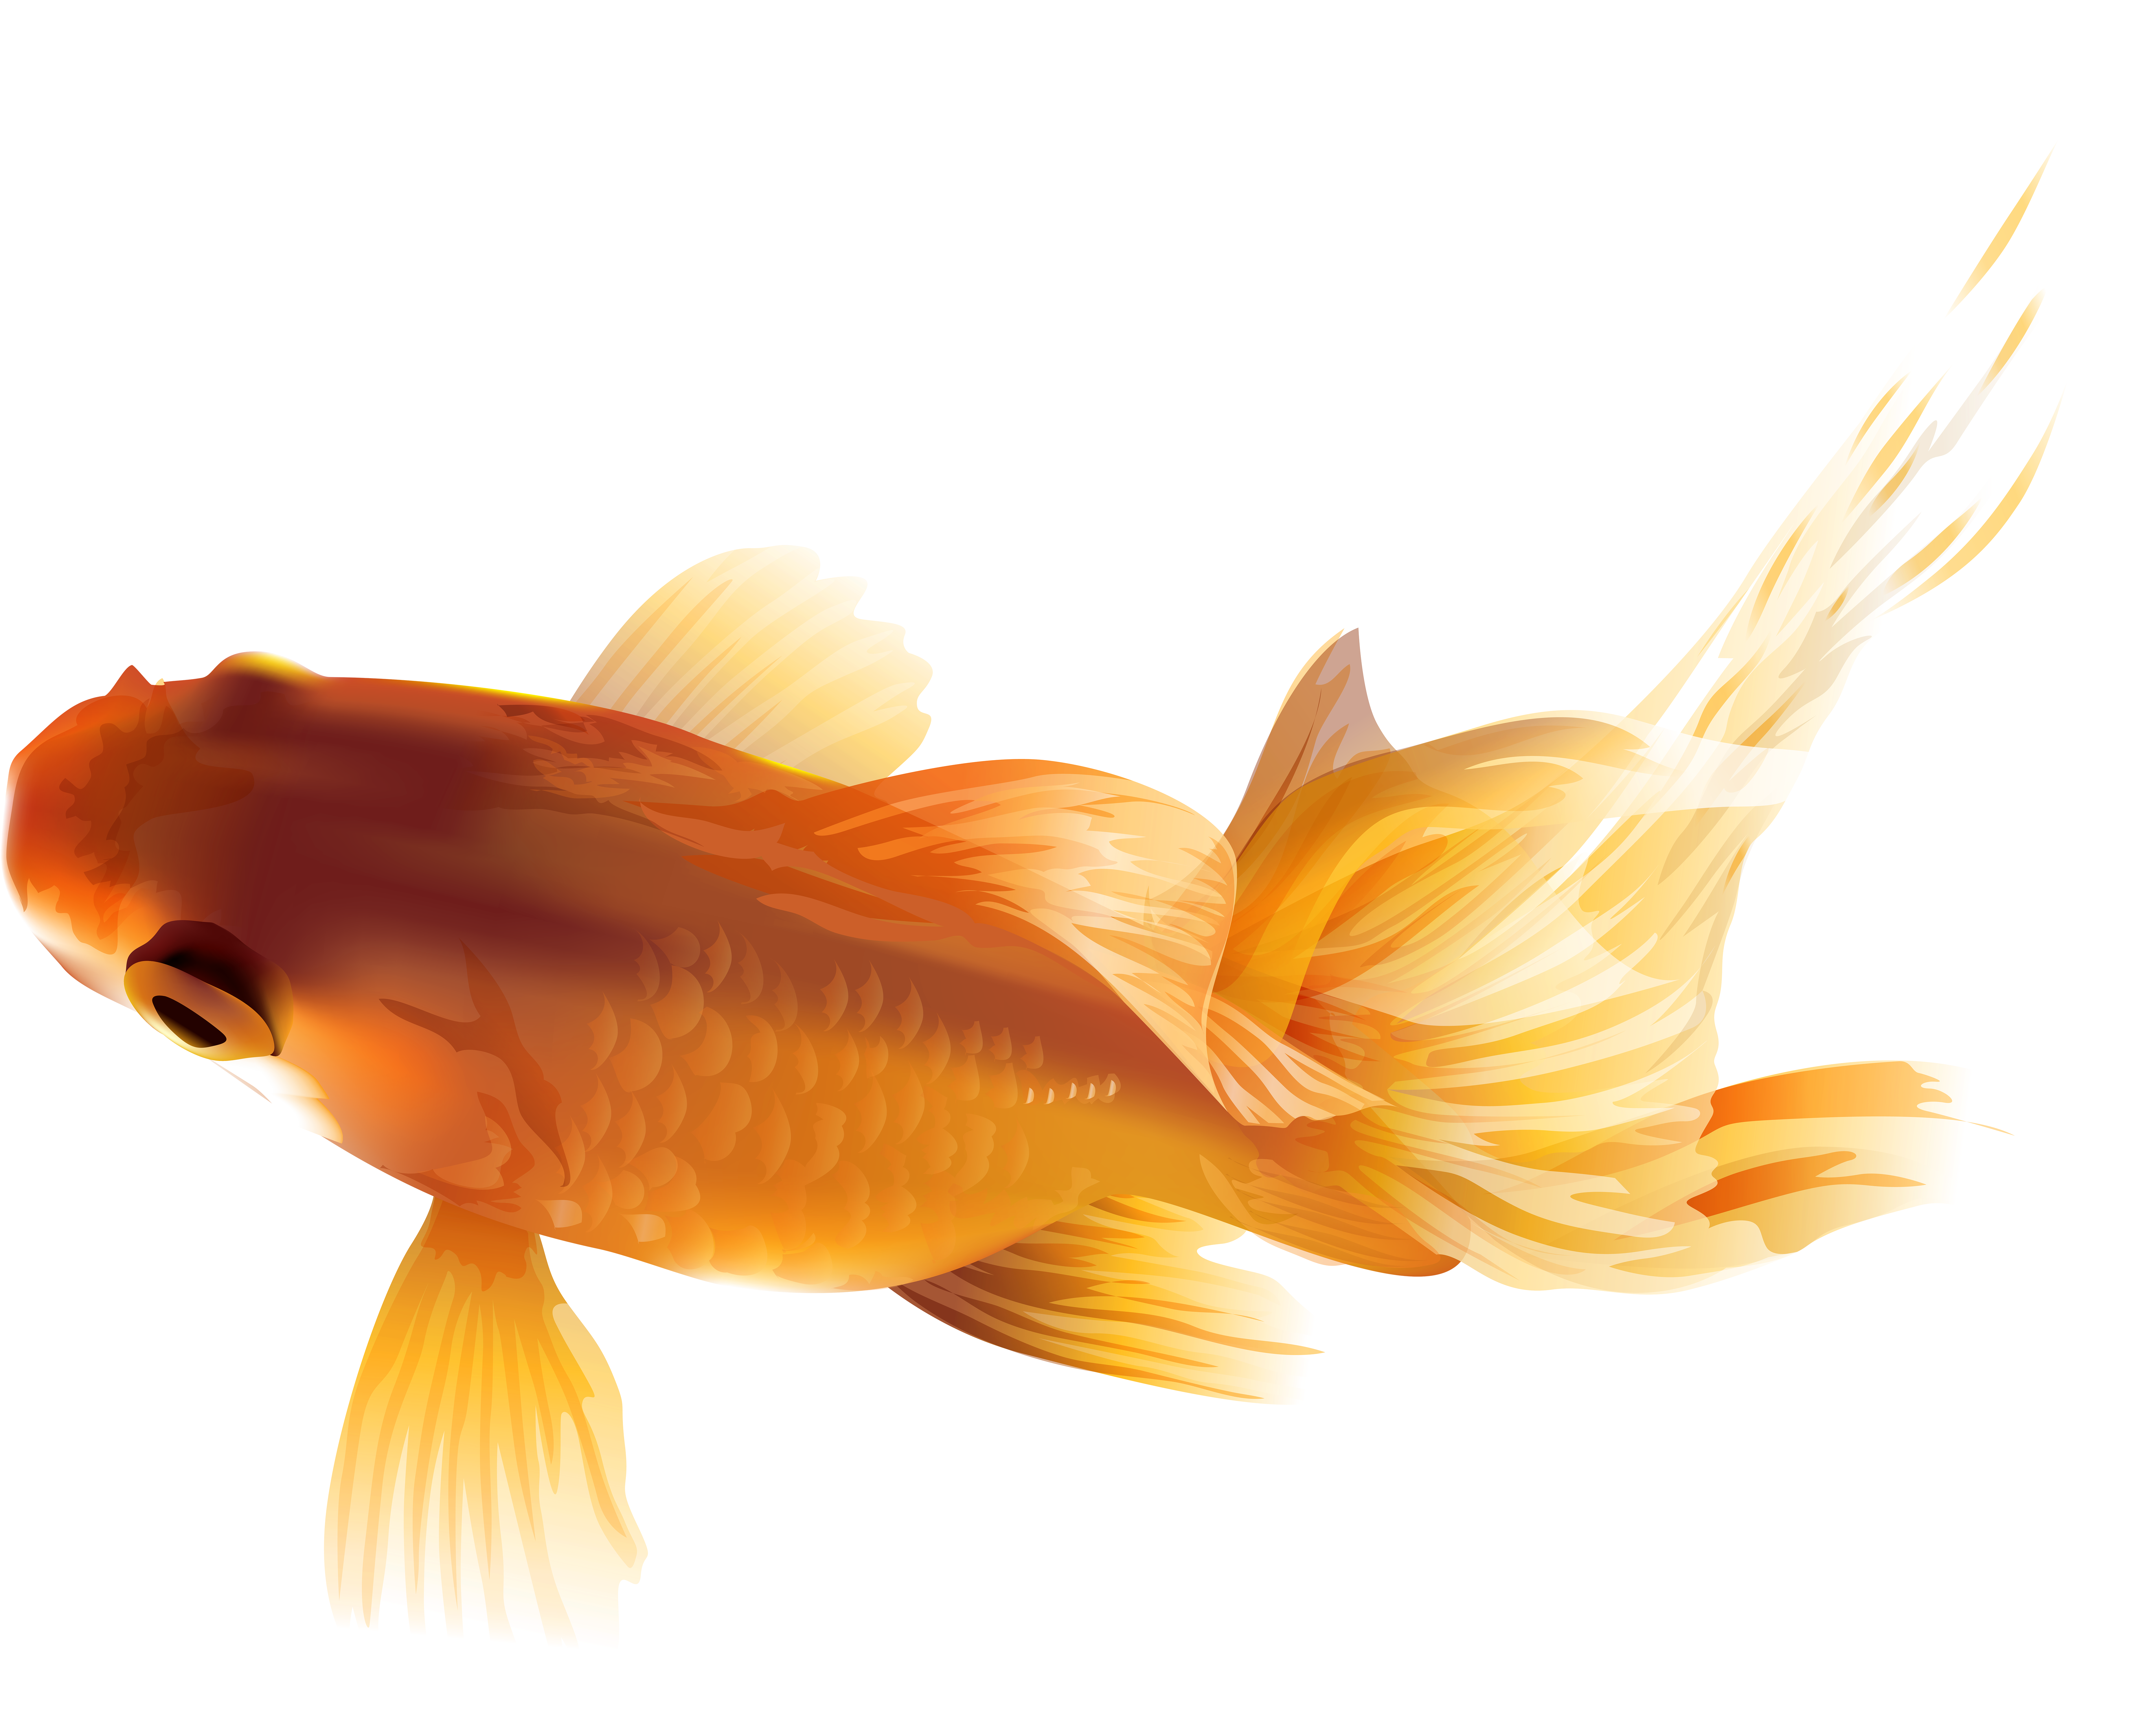 Gold Fish Clipart Saltwater Fish - Gold Fish Clipart Saltwater Fish (8000x6418)